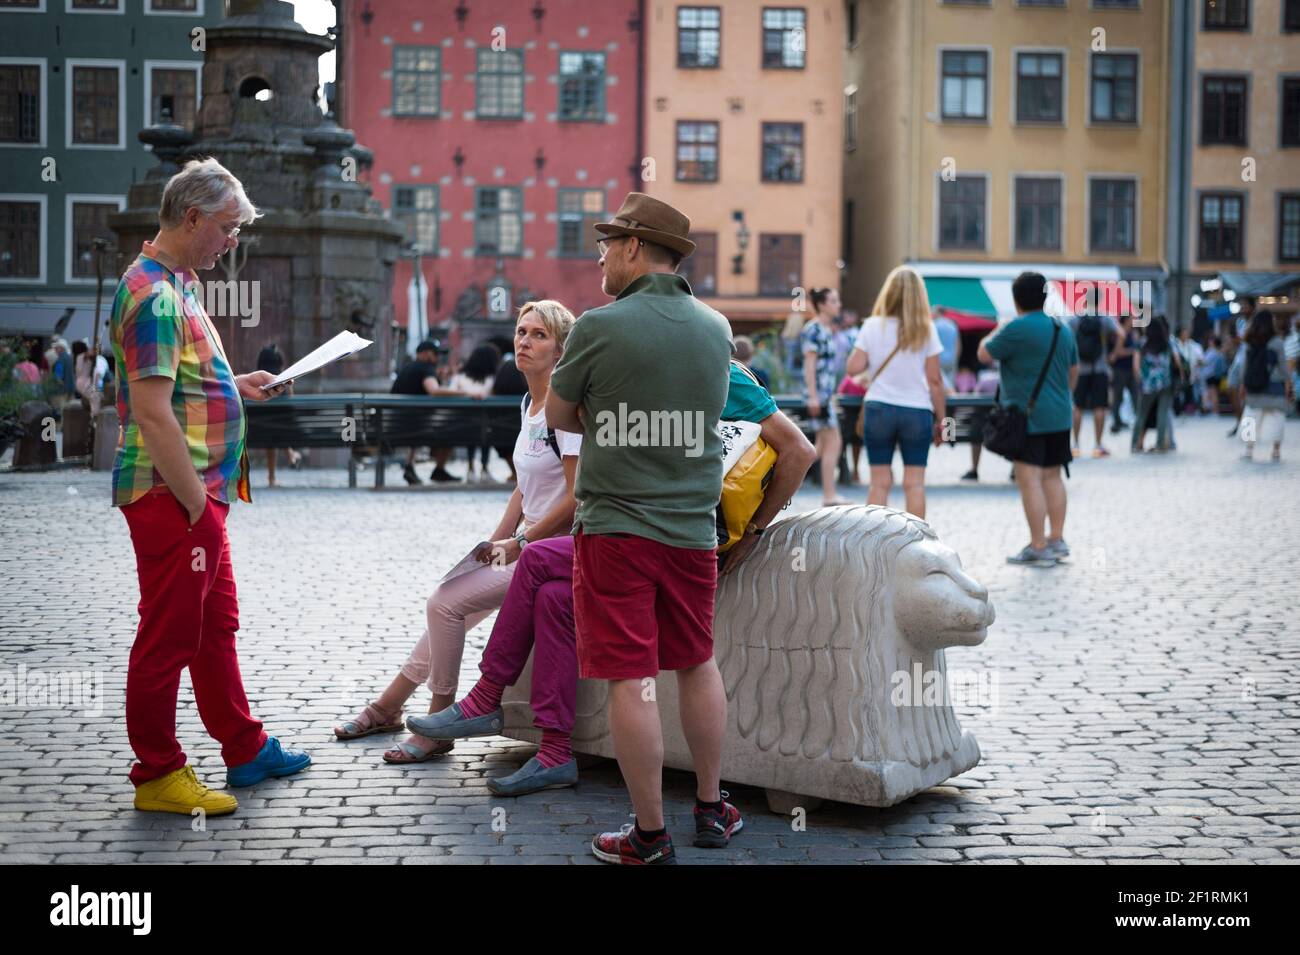 Colourful tourists in Stortorget, Gamla Stan, Stockholm, Sweden. Stock Photo